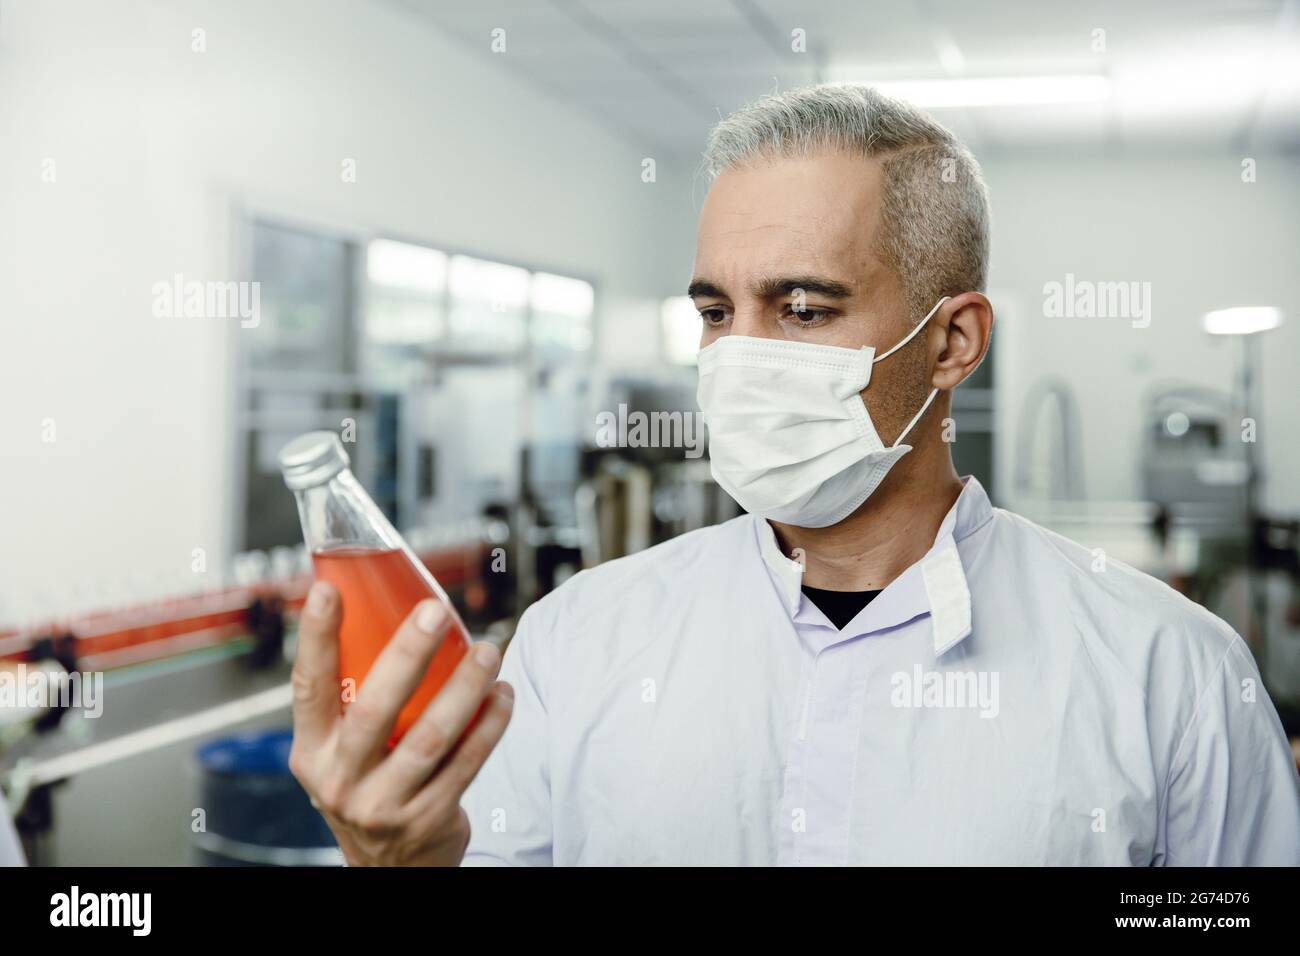 Quality control and food safety person inspection the product standard in the food and drink factory production line. Stock Photo